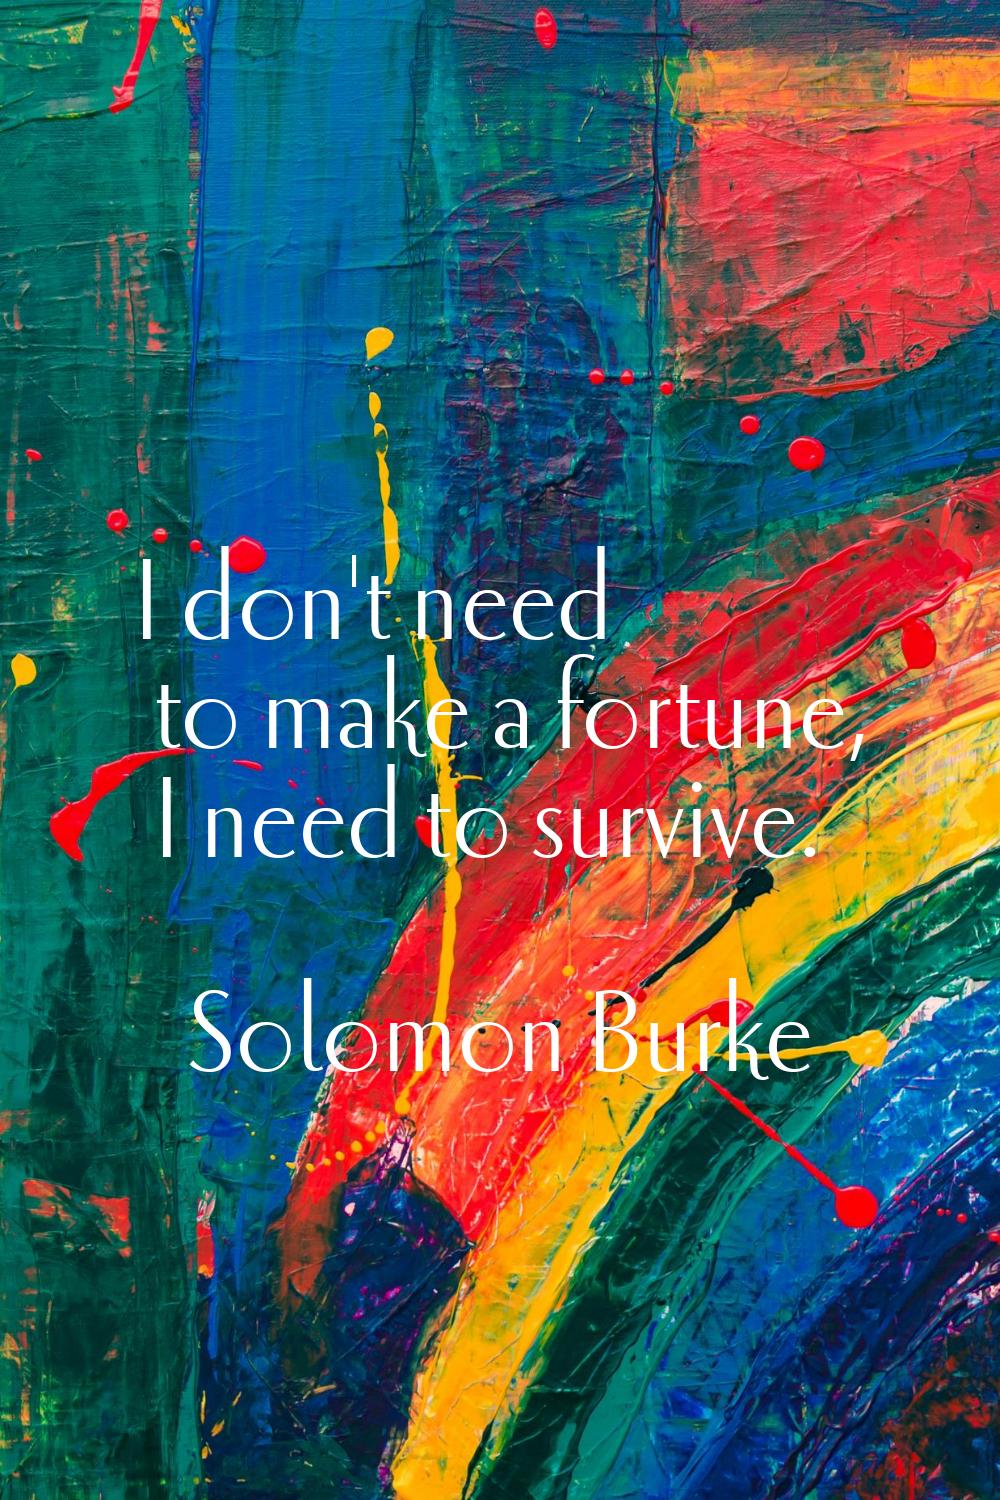 I don't need to make a fortune, I need to survive.